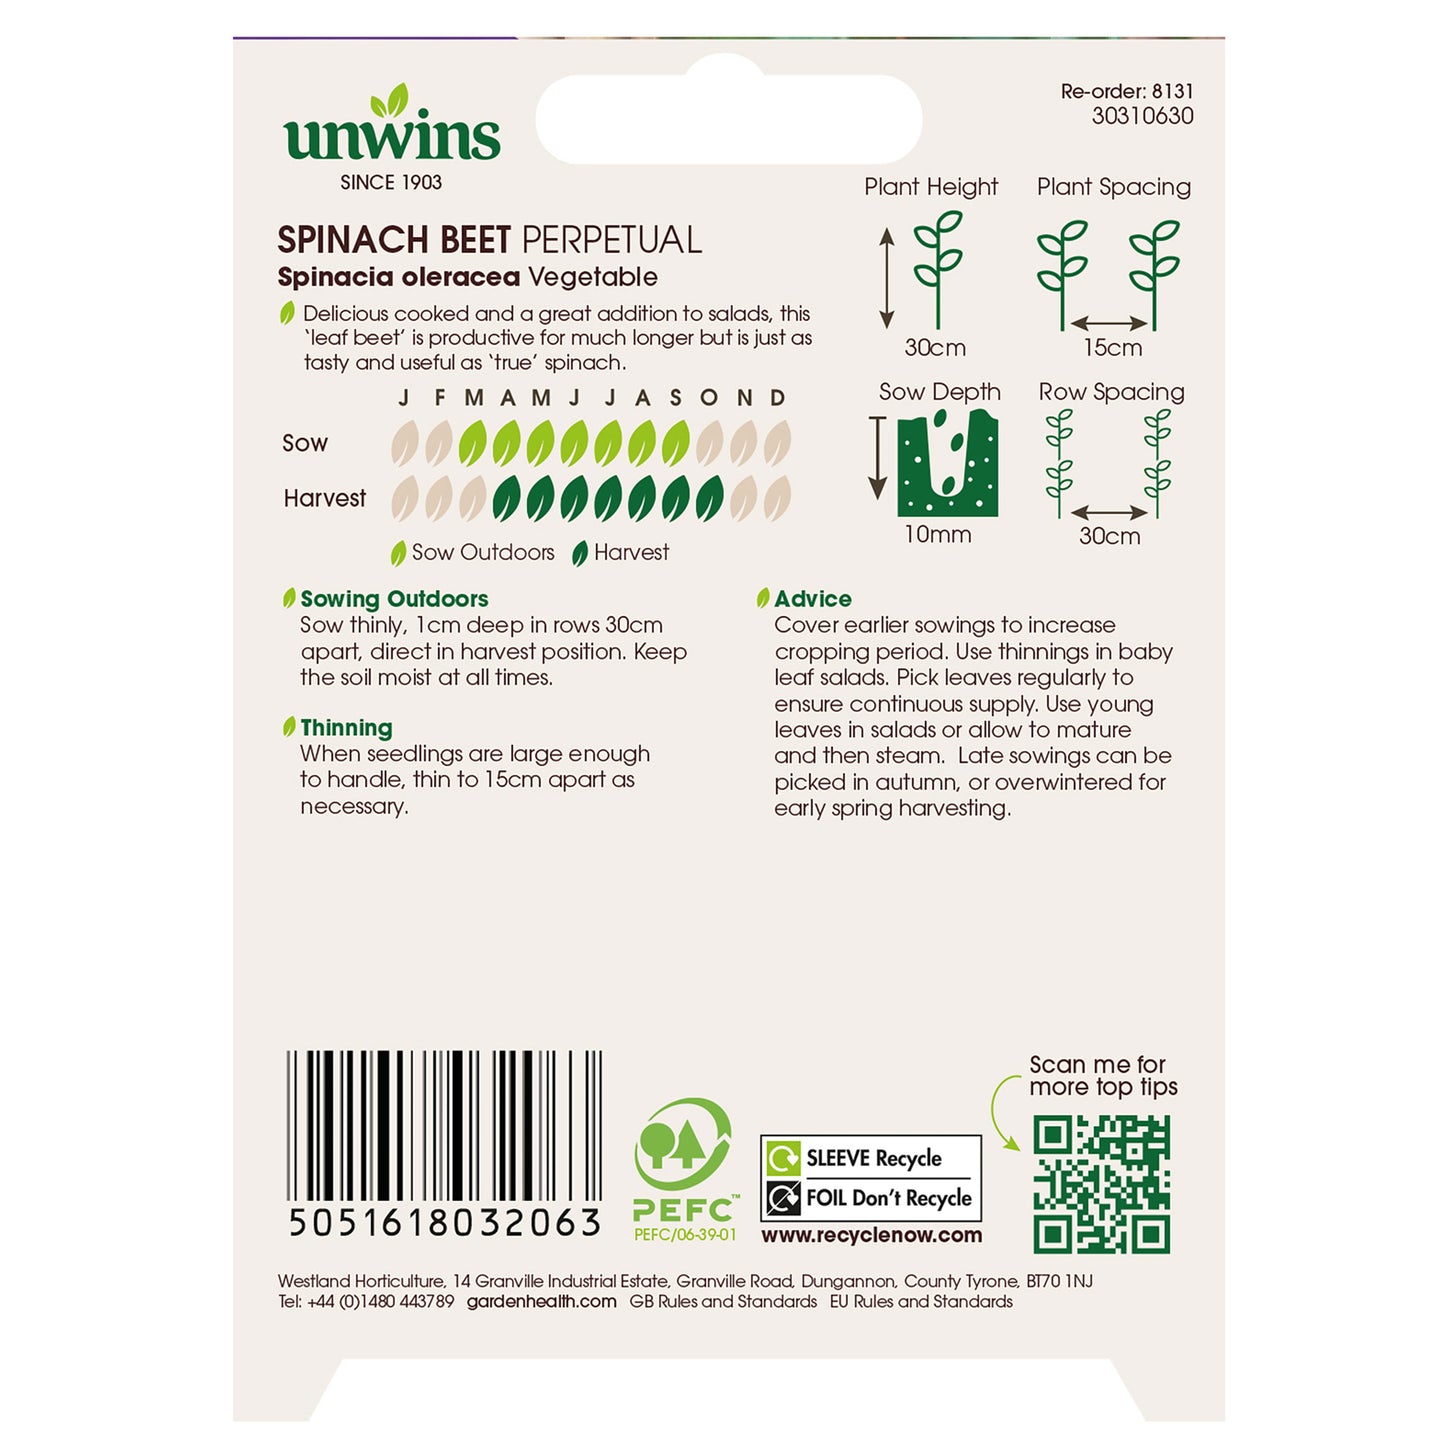 Unwins Spinach Beet Perpetual Seeds back of pack